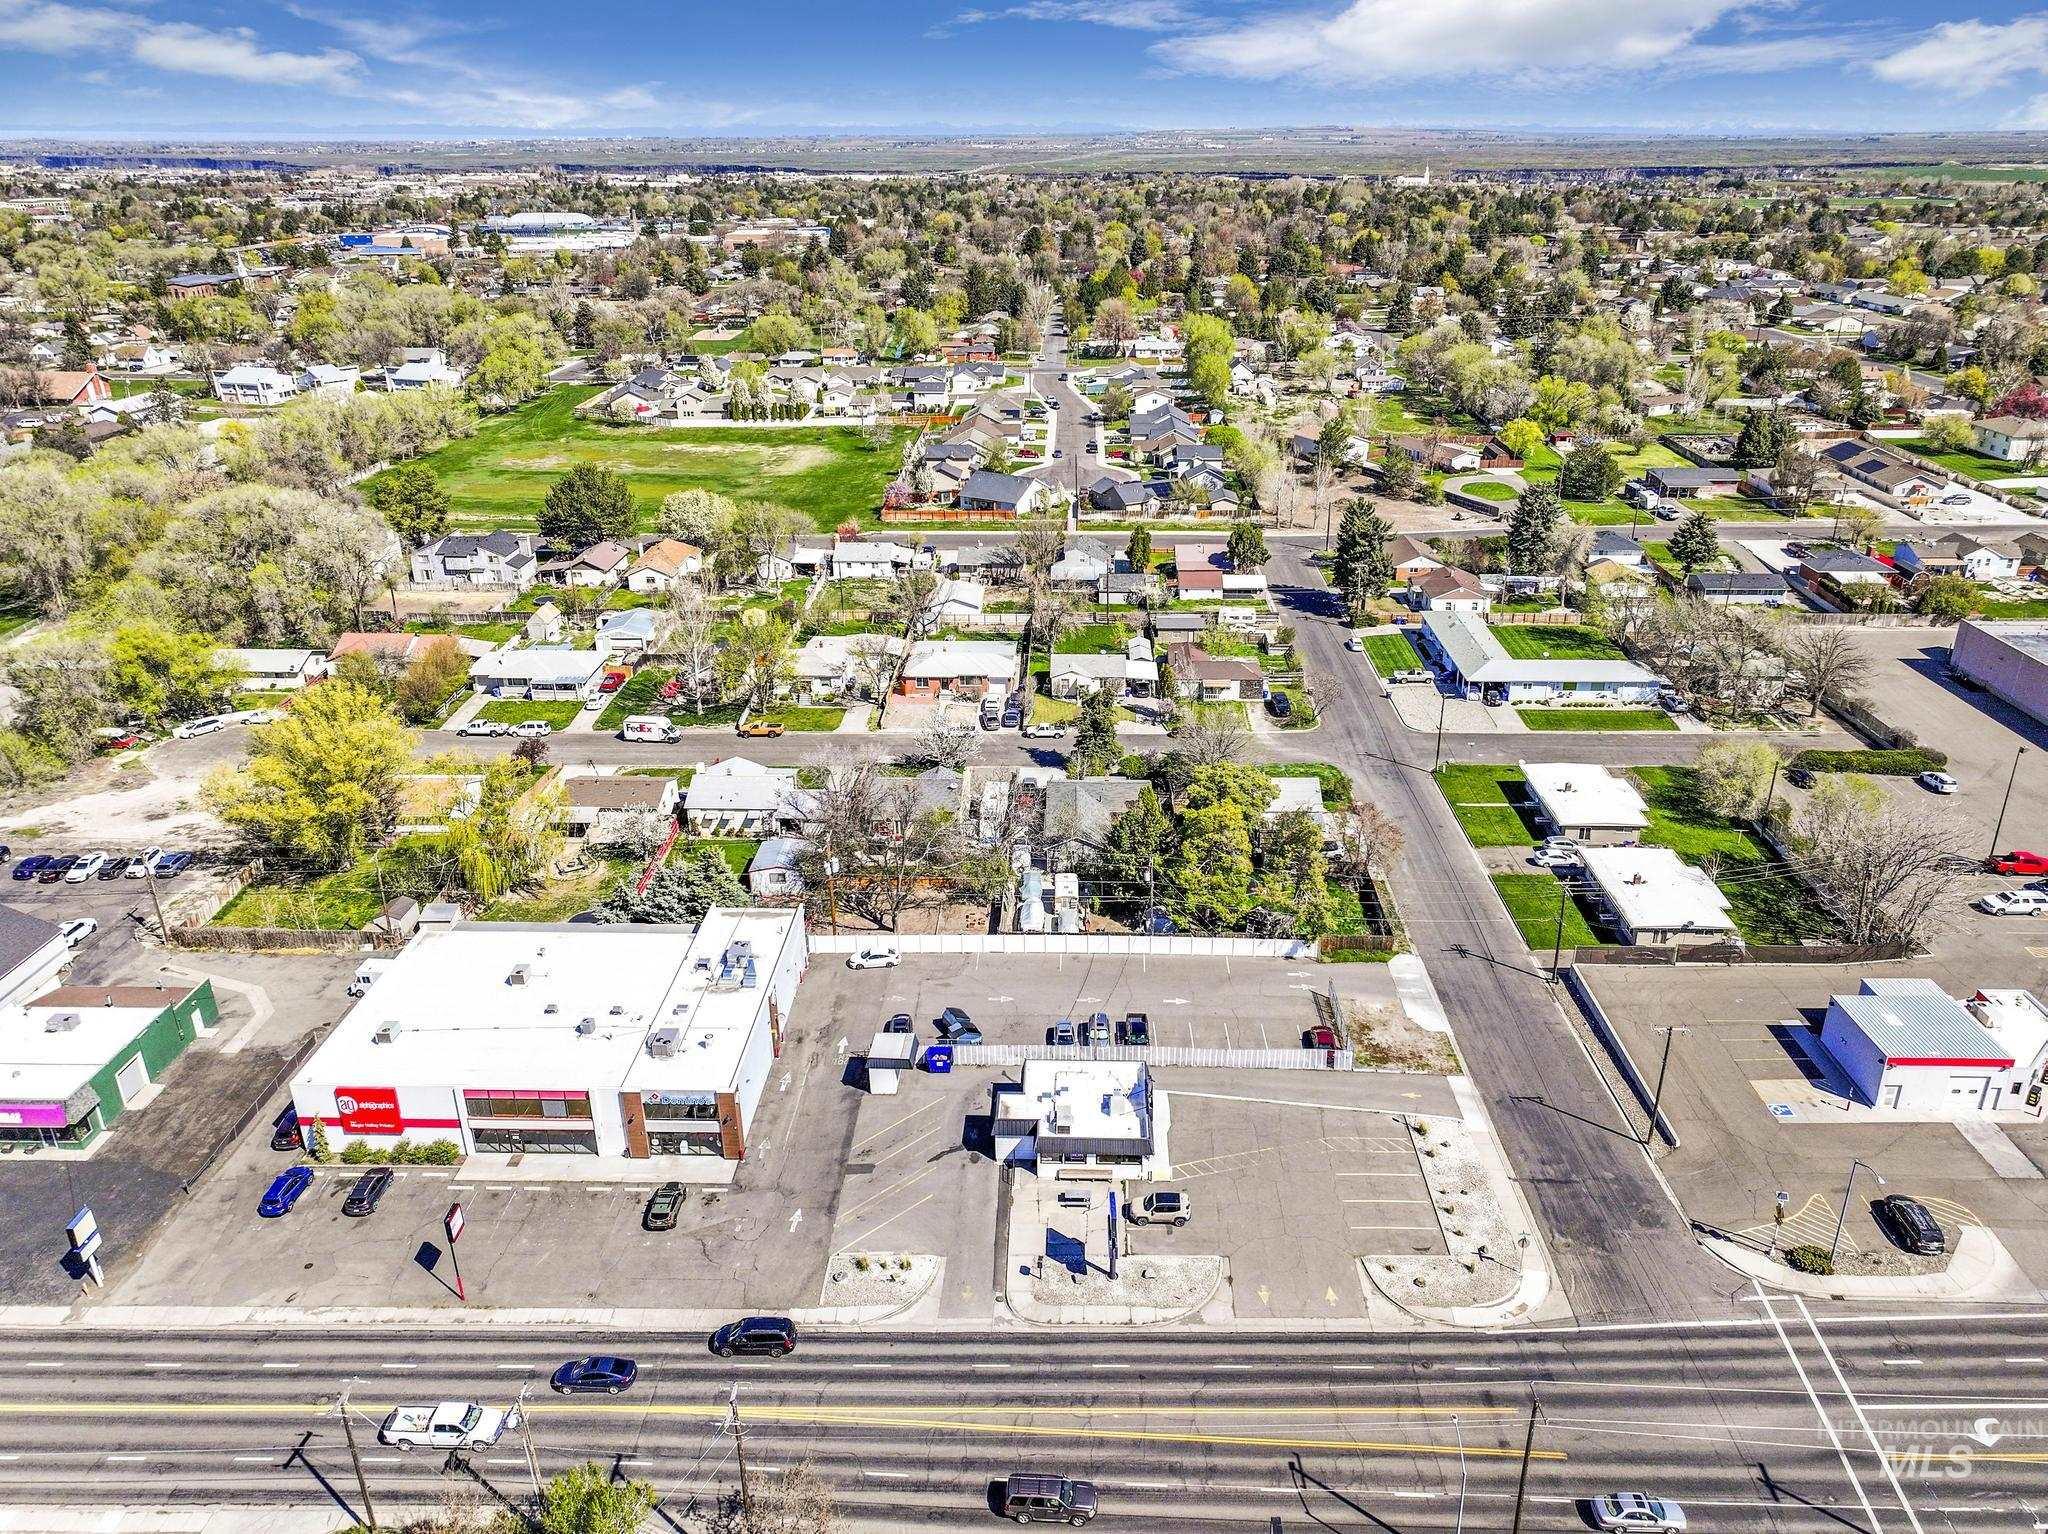 1879 Addison Ave E, Twin Falls, Idaho 83301, Business/Commercial For Sale, Price $529,500,MLS 98907522